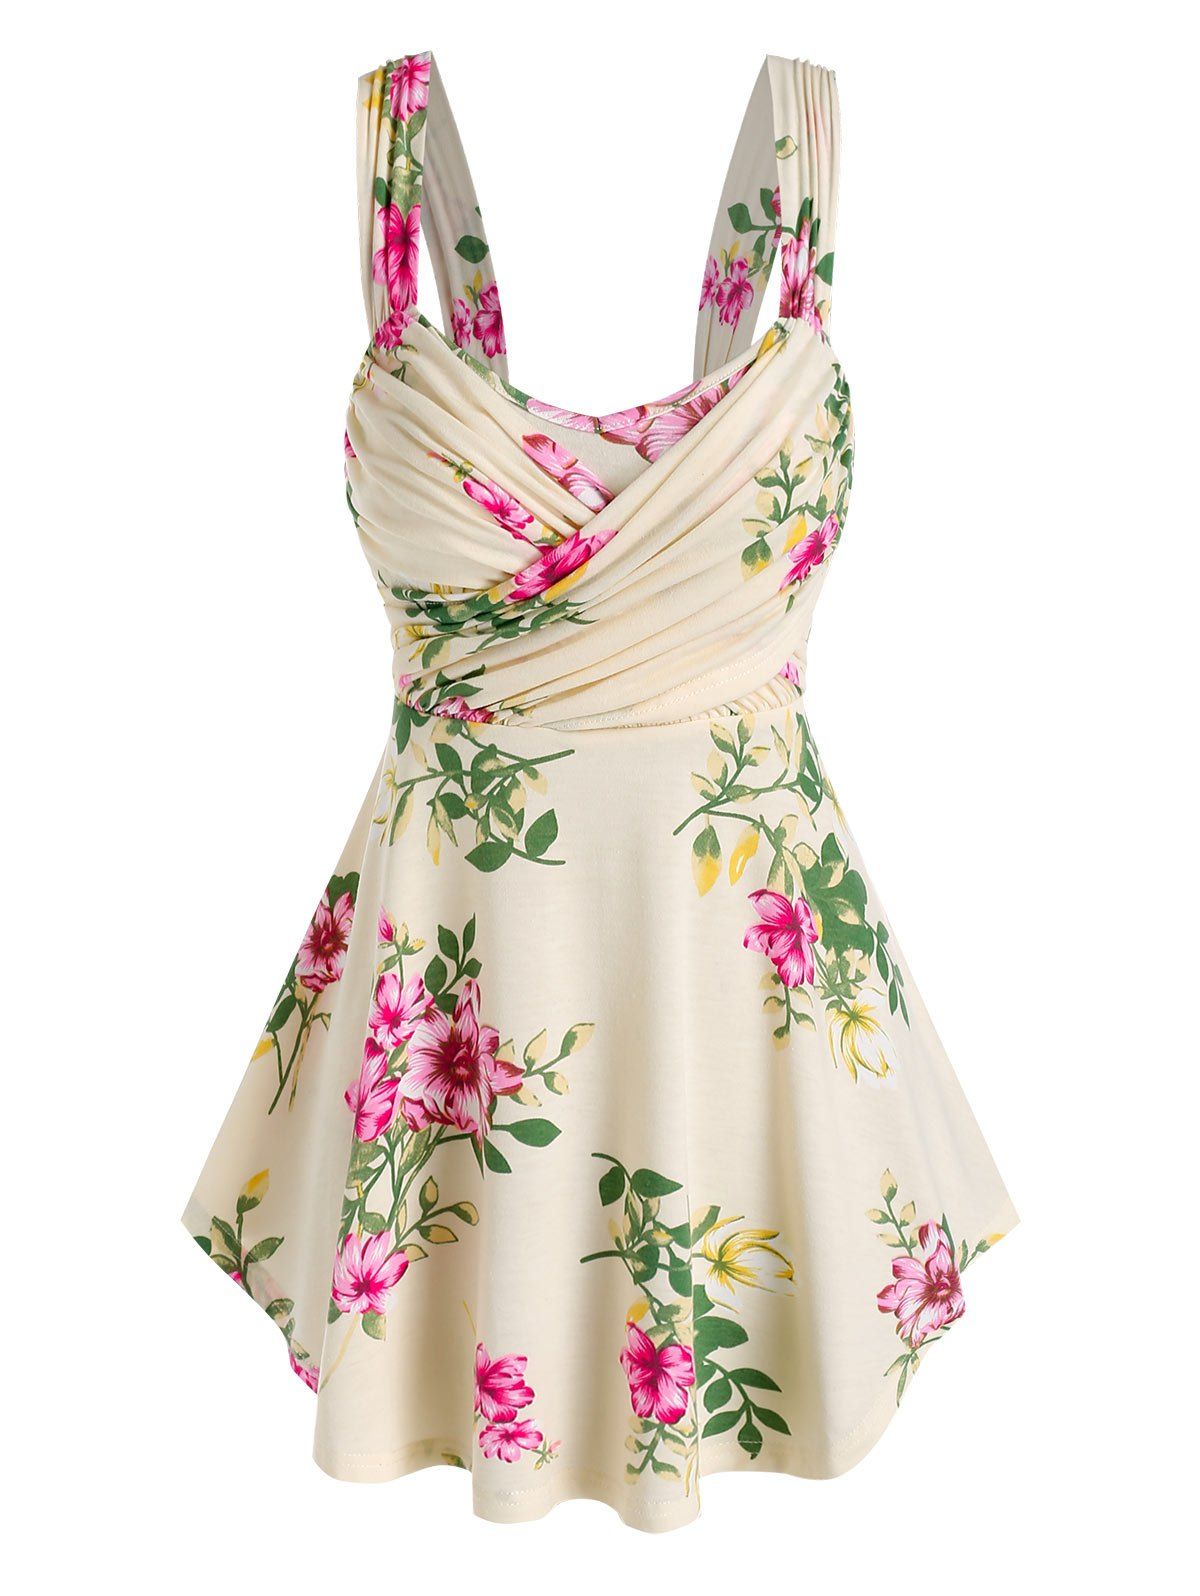 Ruched Crossover Floral Print Tank Top - LIGHT YELLOW M